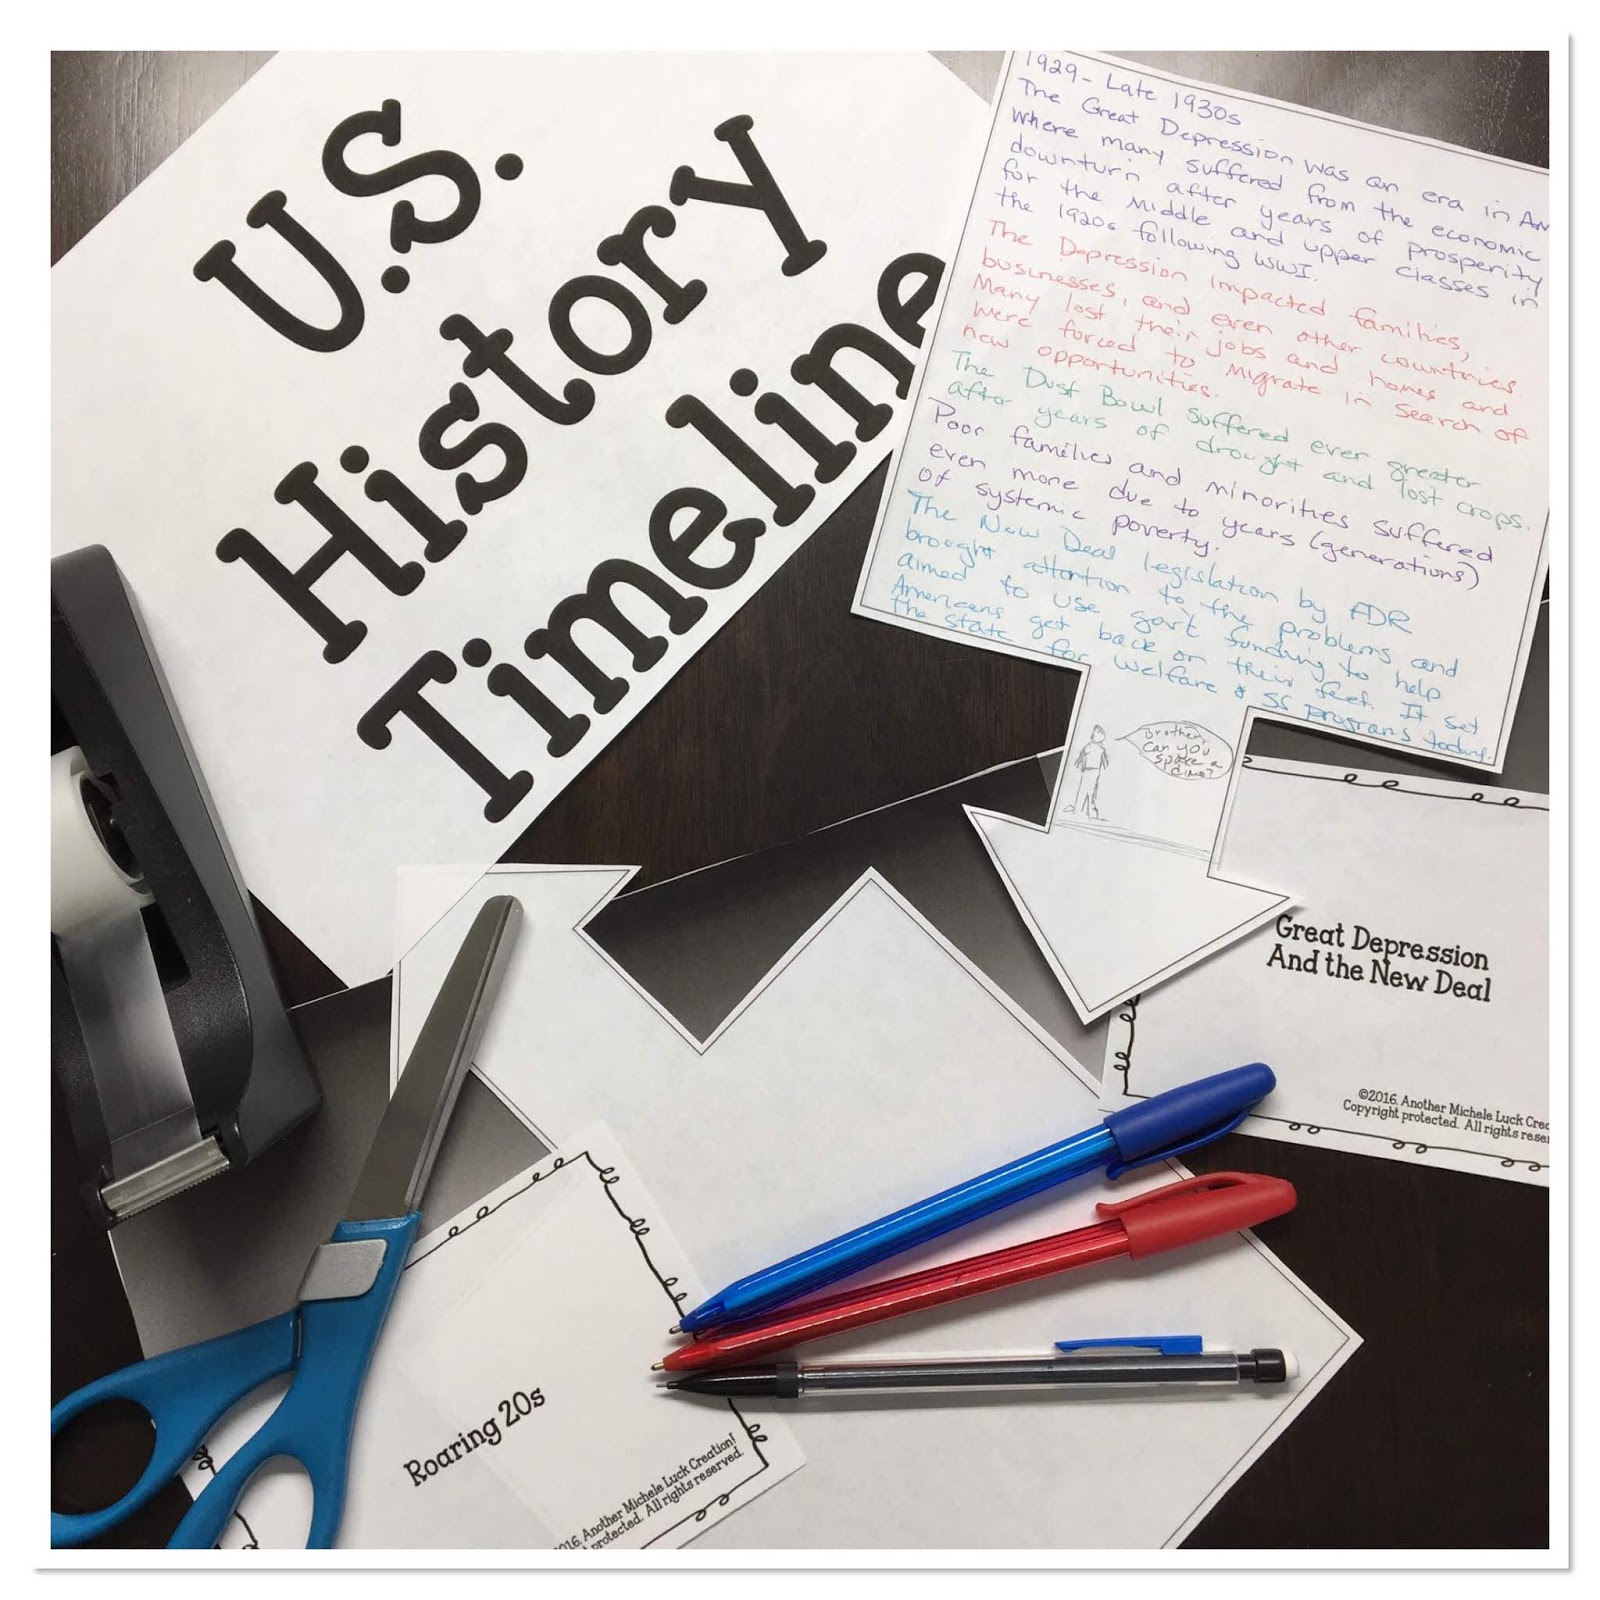 First year teacher dreading the end-of-the-year wrap-up? Overwhelmed by the sheer volume of content you need to cover for standardized testing? Using this easy review activity, you can easily prep for standardized testing and final exams! #newteacher #firstyearteacher #endoftheyear #endofyearwrapup